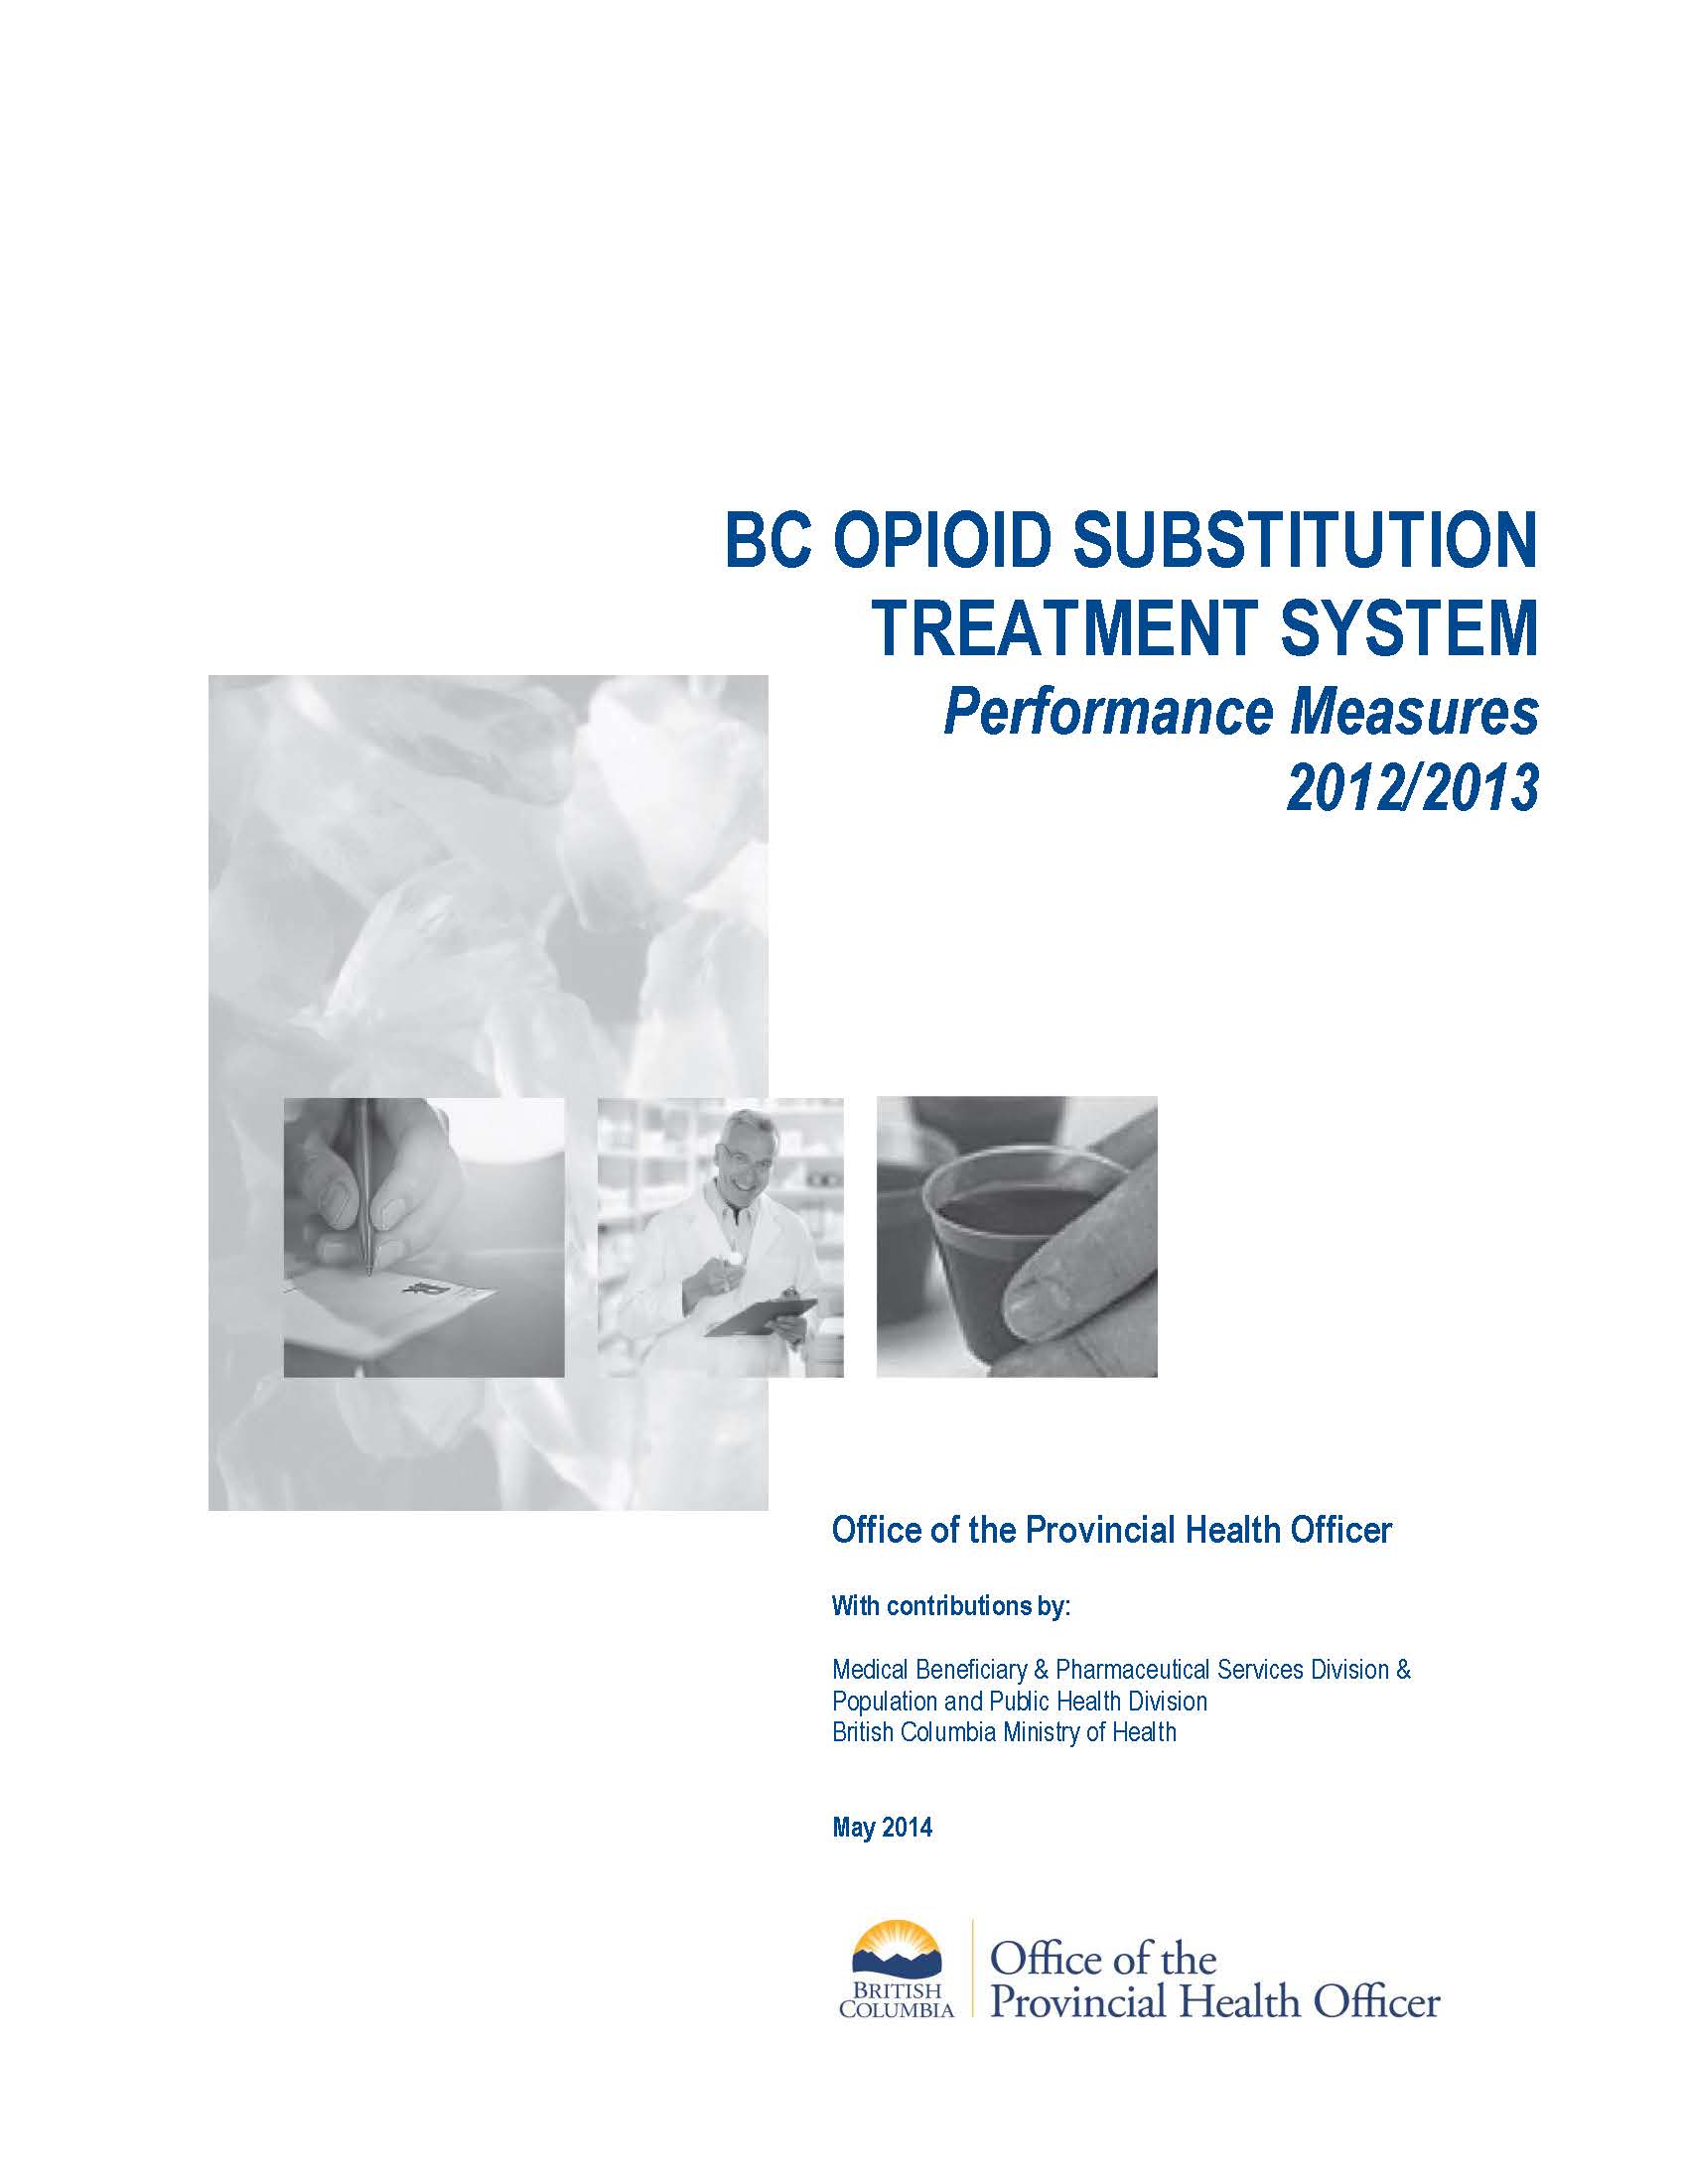 BC Opioid Substitution Treatment System: Performance Measures (2012/2013)